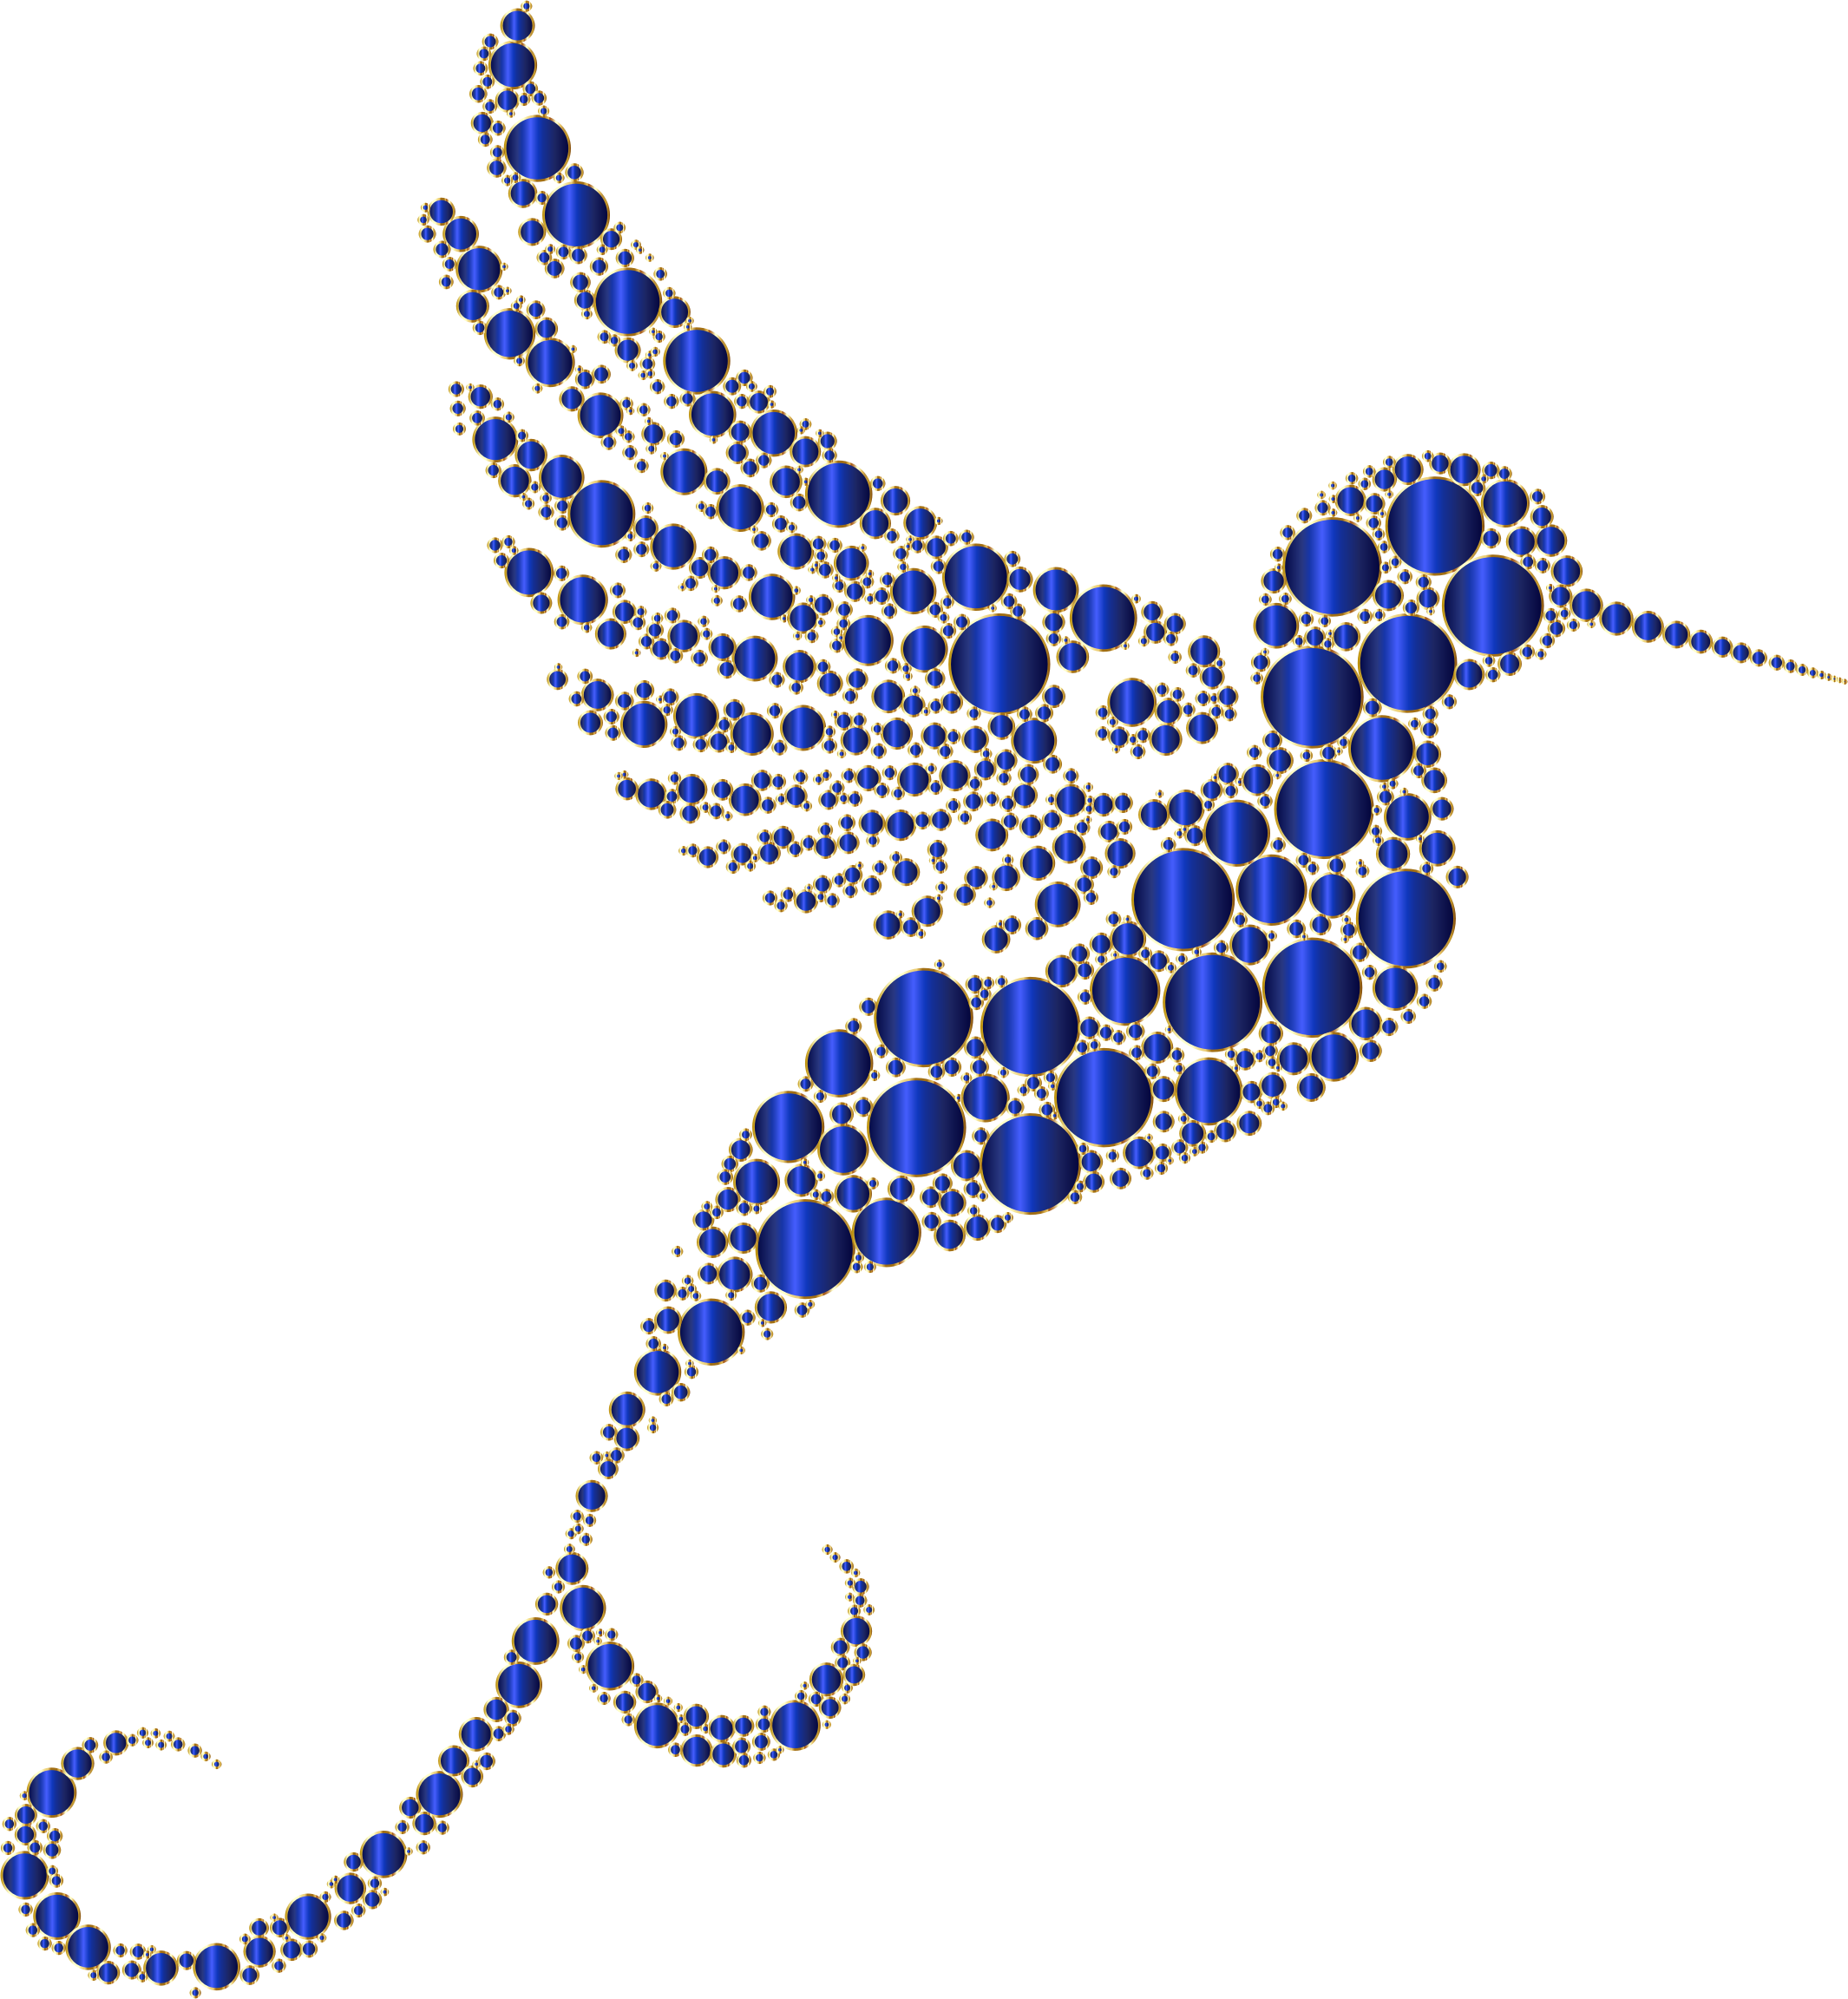 Flying Silhouette Hummingbird PNG Pic